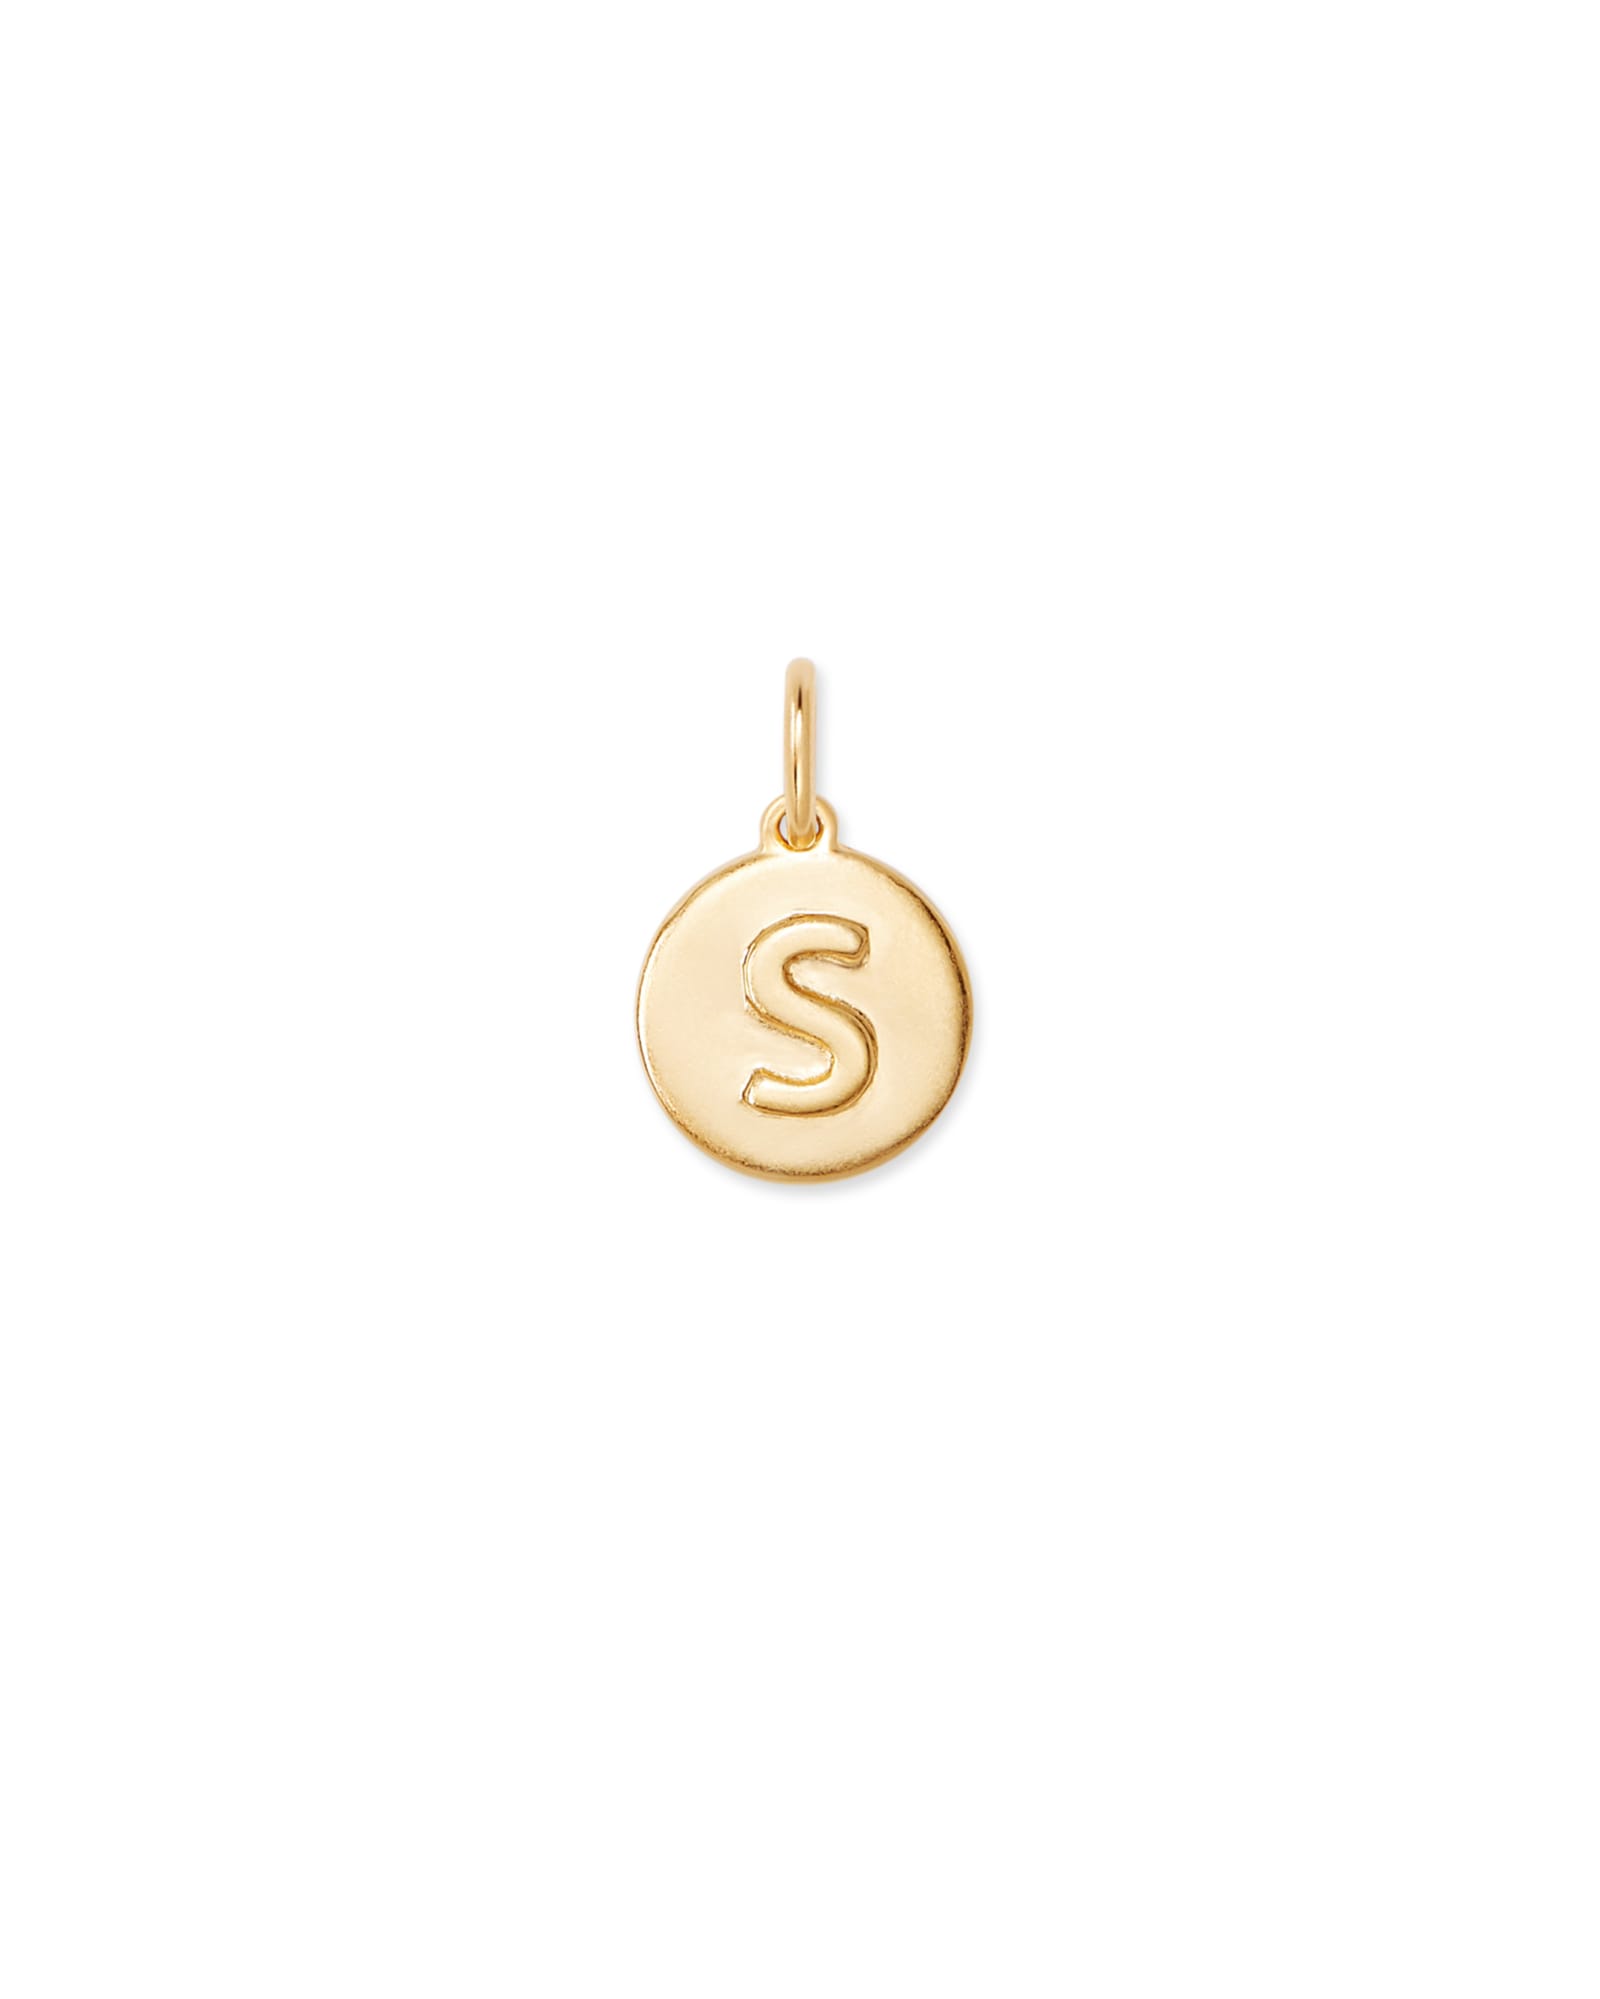 Kendra Scott Letter S Coin Charm in 18k Gold Vermeil | Sterling Silver